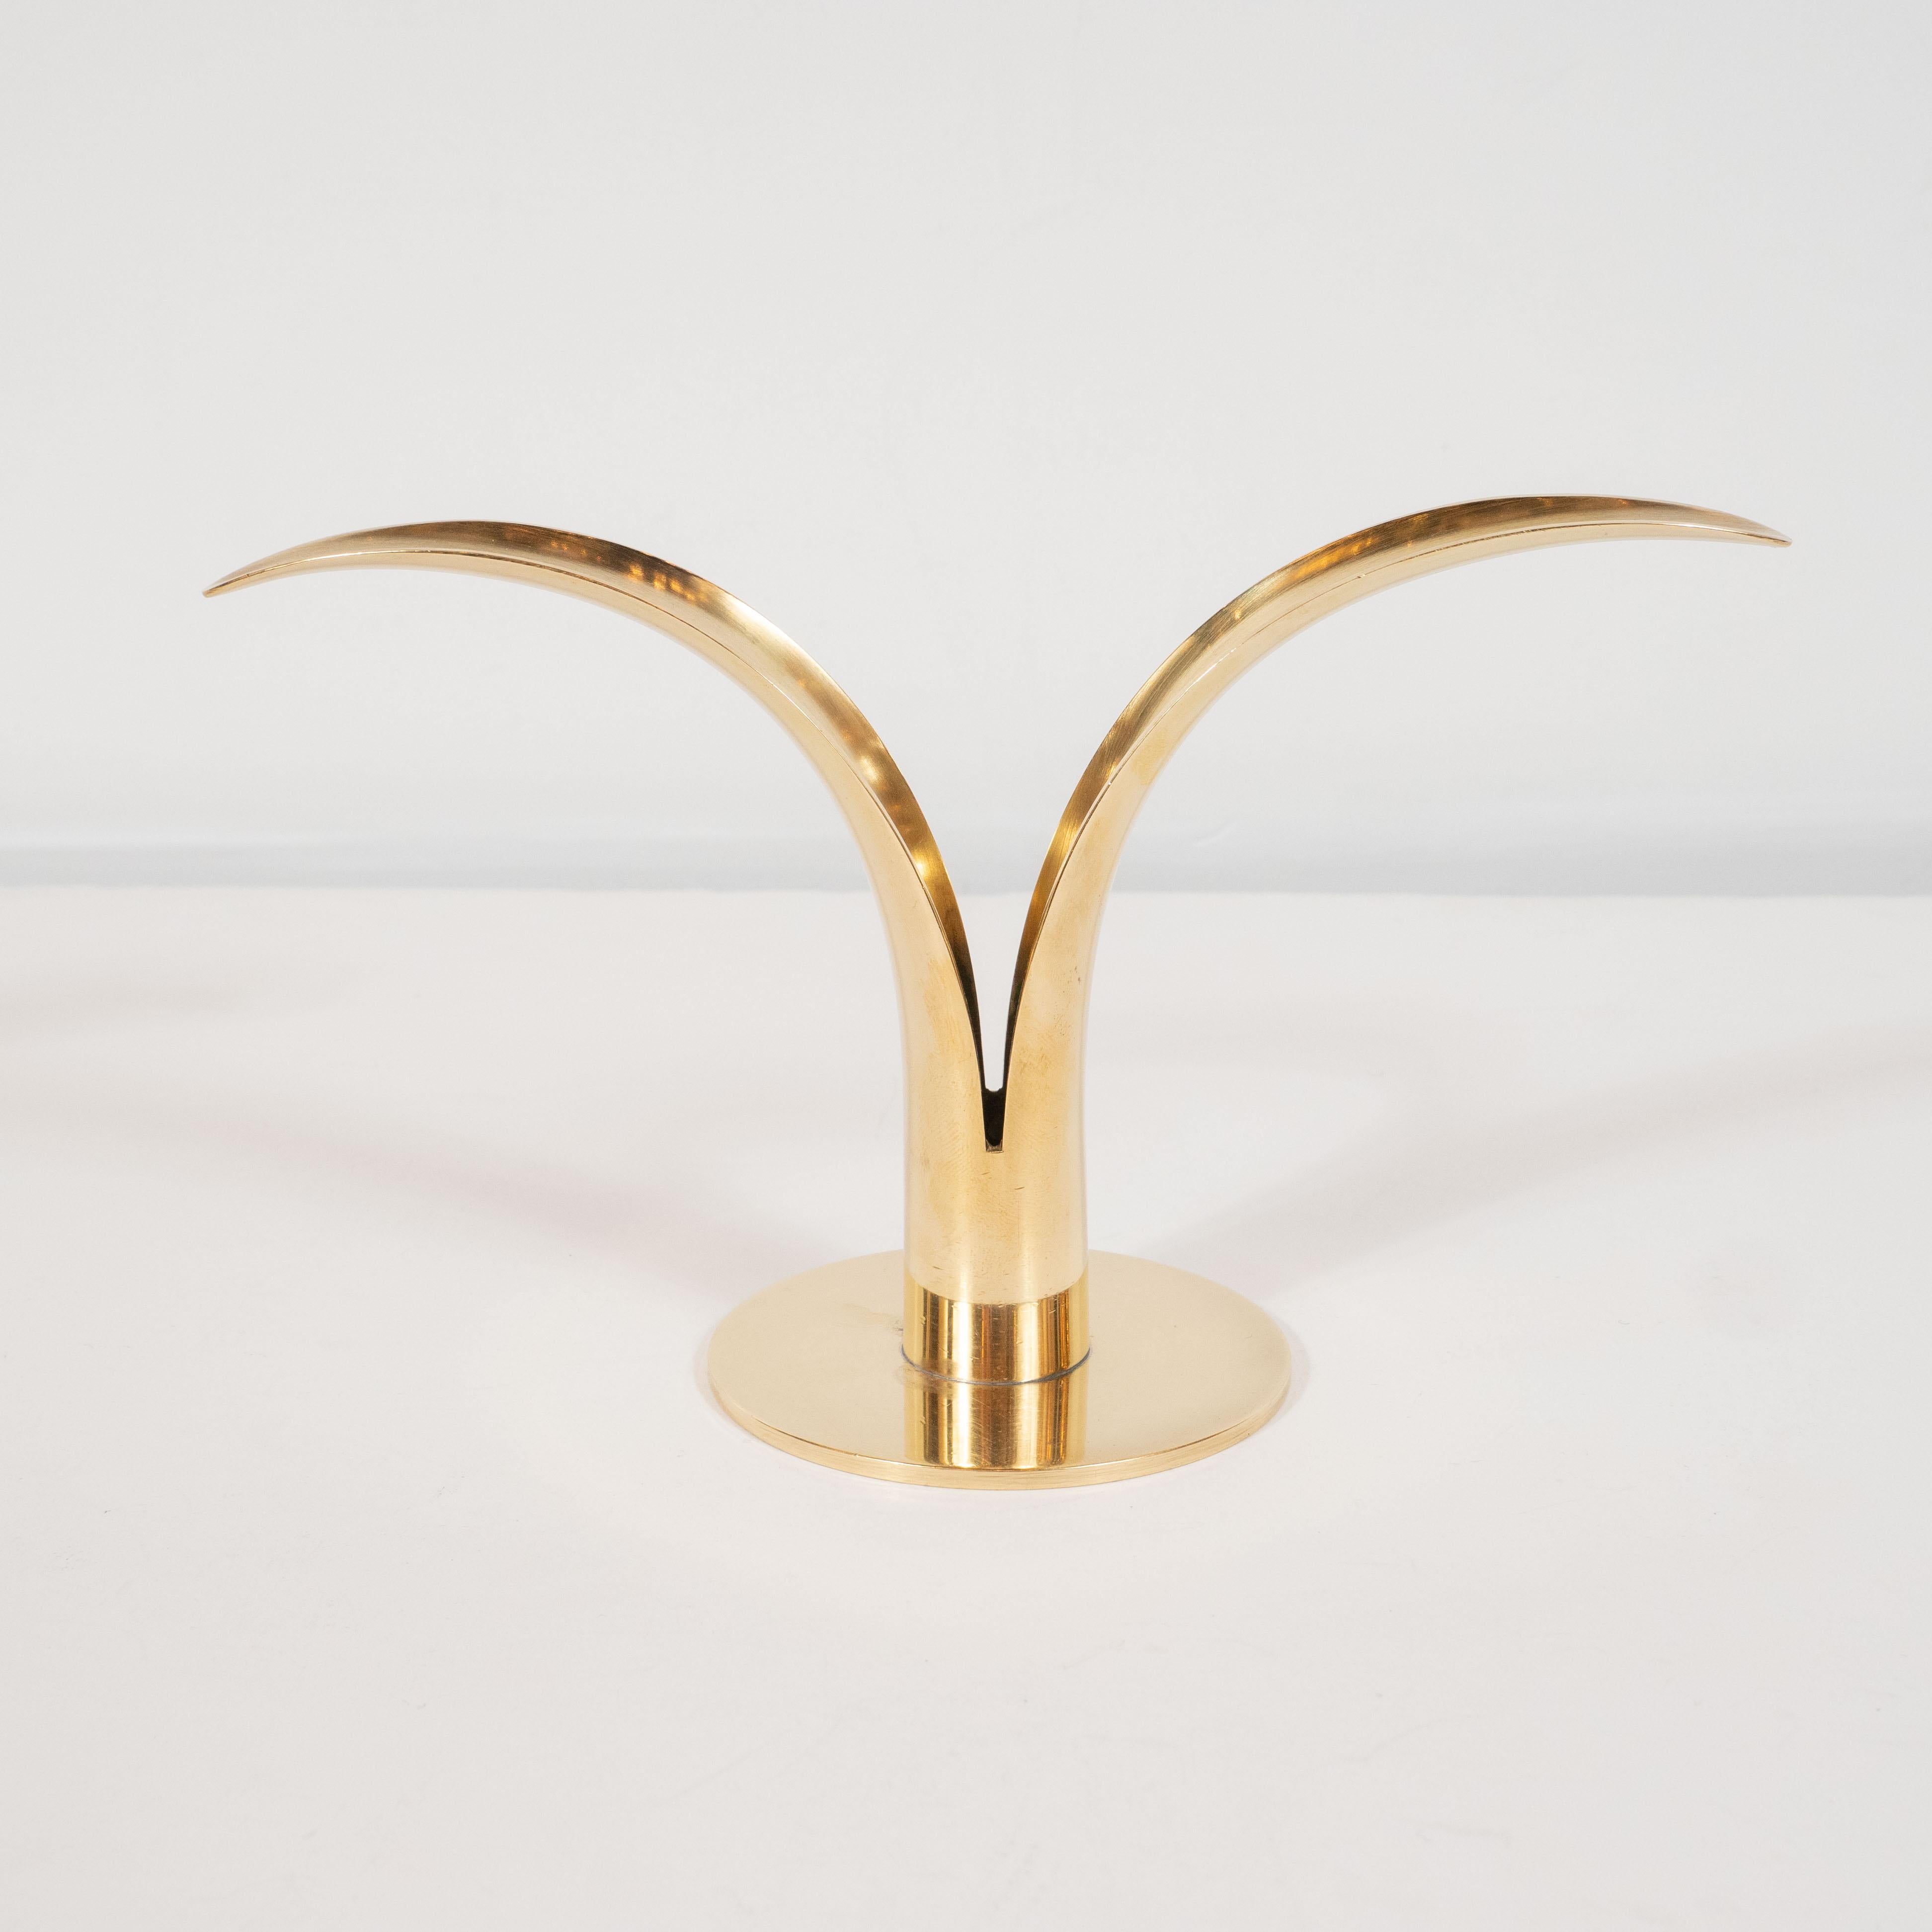 This elegant and graphic pair of candleholders were realized by the esteemed Swedish maker, Konst, circa 1960. The feature curved tapered forms- suggesting two lily petals, rising upwards from a circular base, all realized in lustrous polished